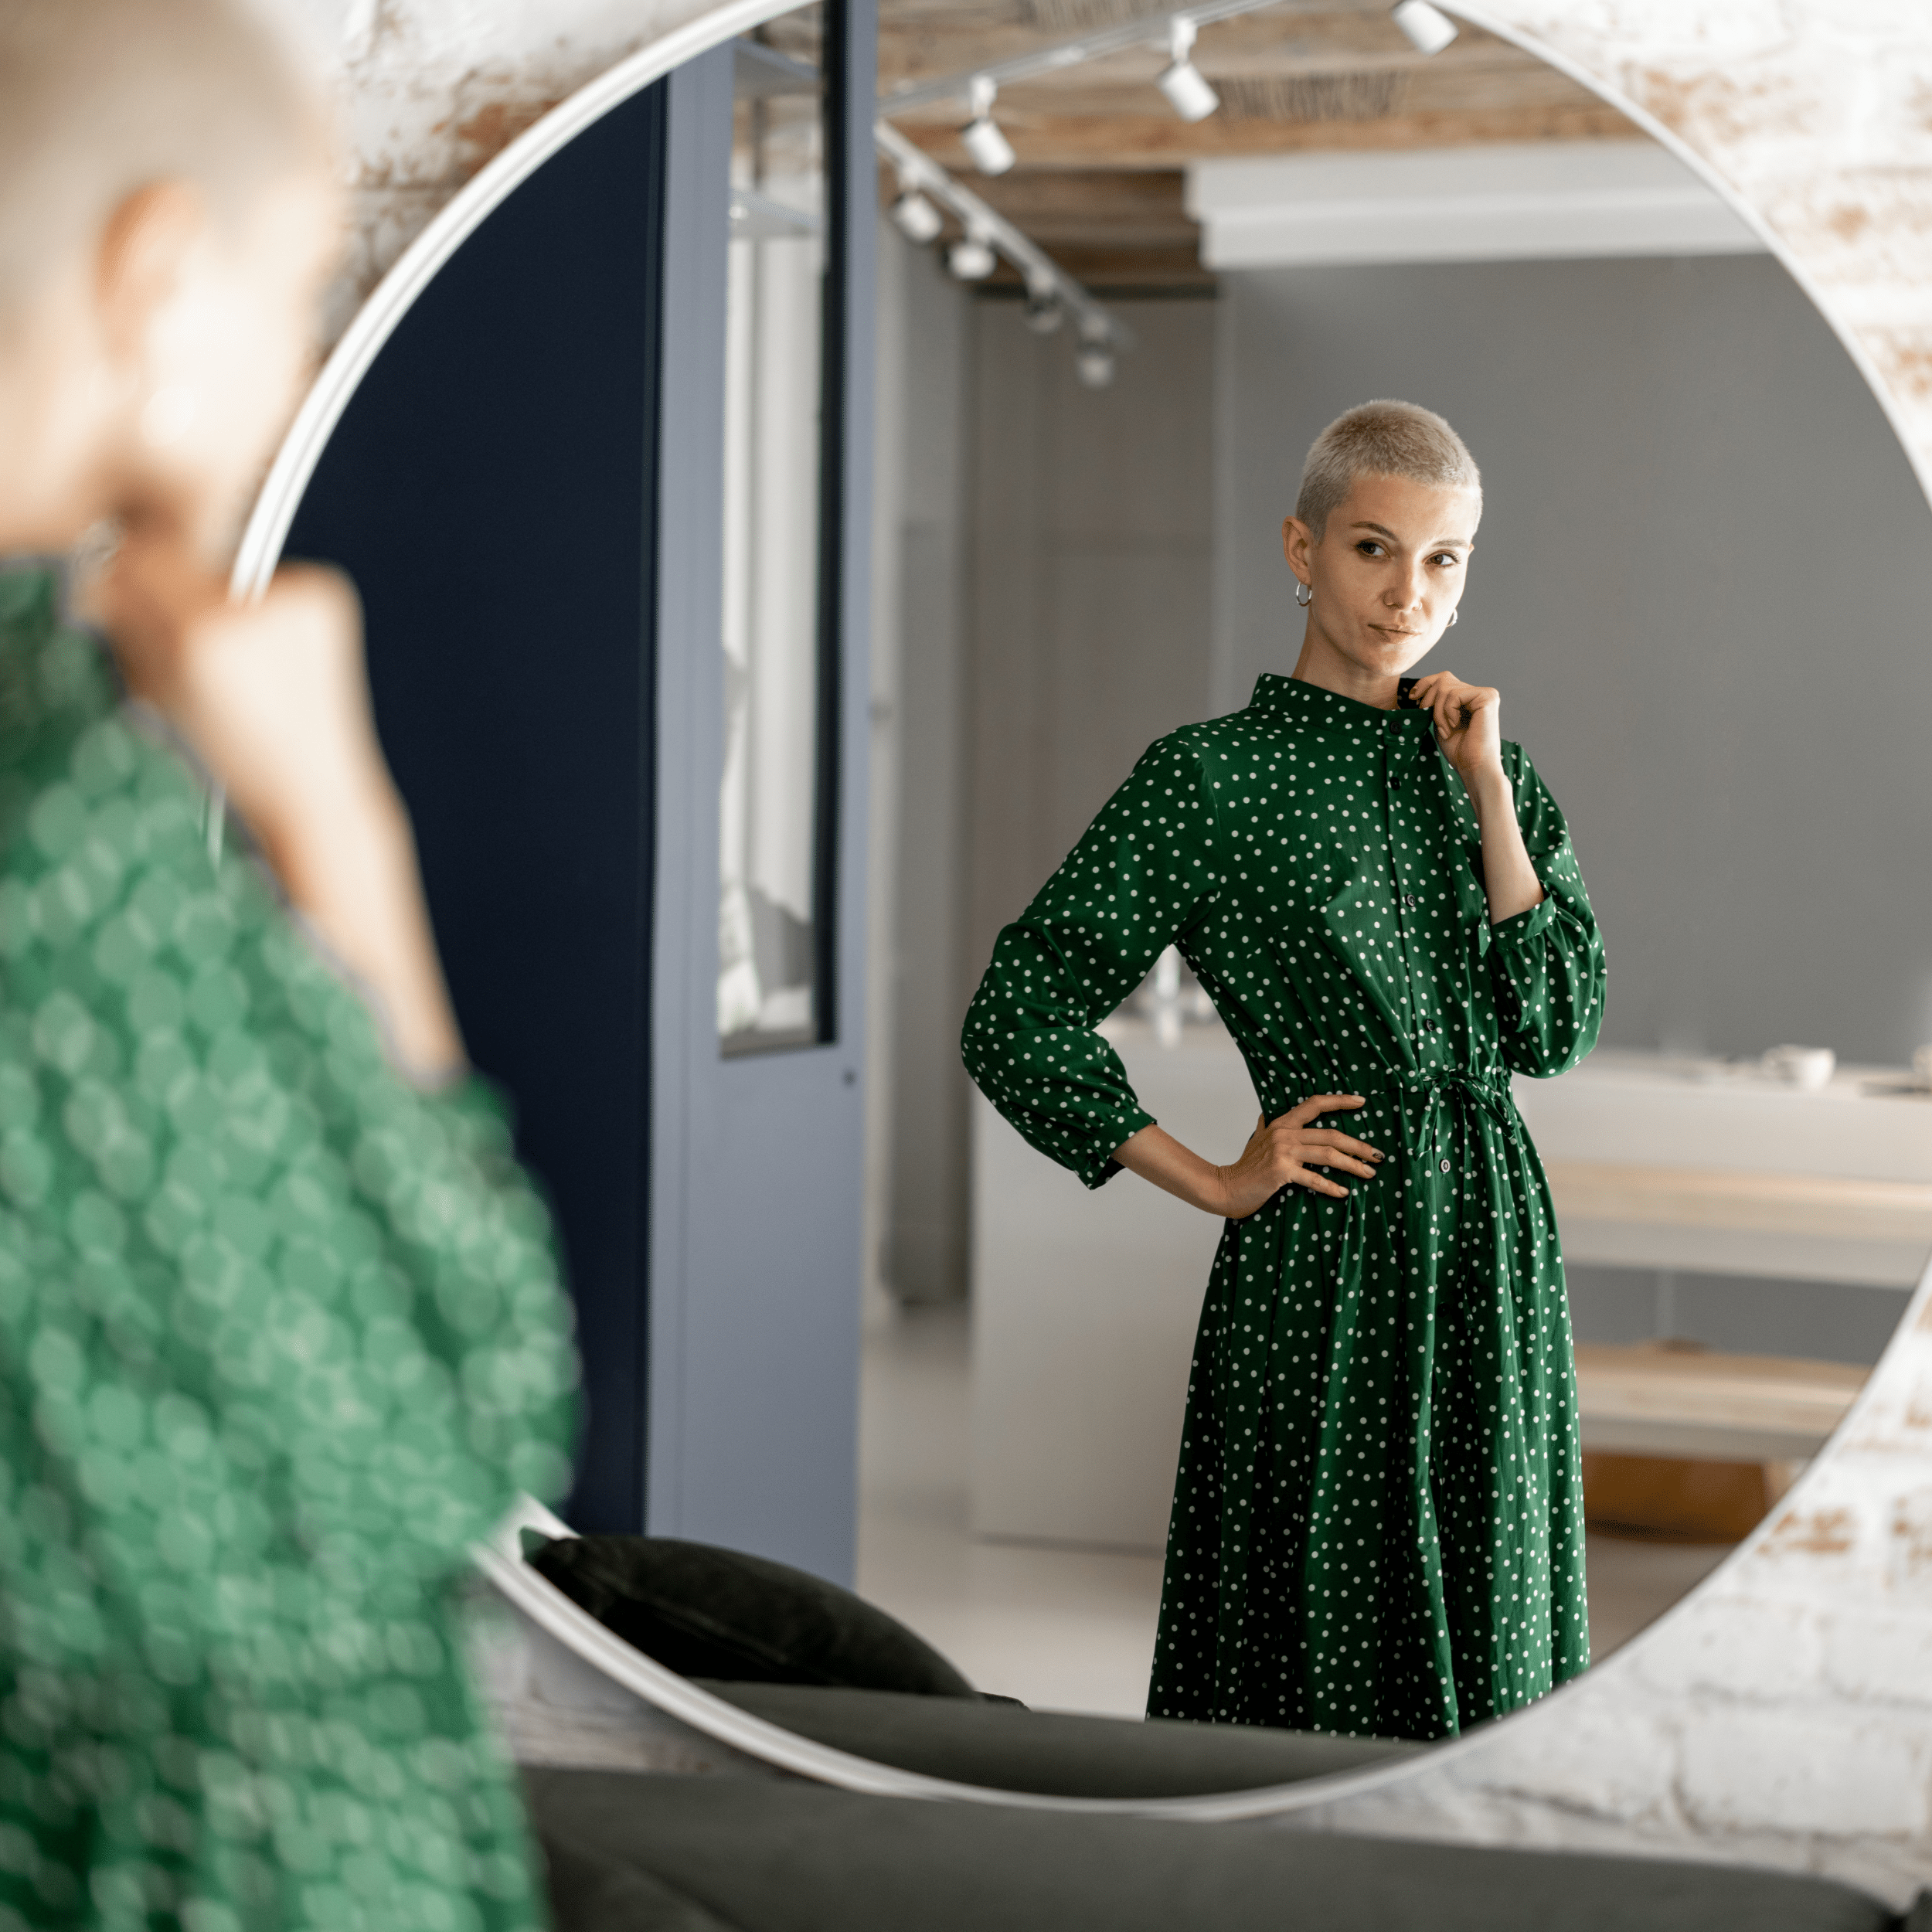 Woman looking at herself in the mirror.